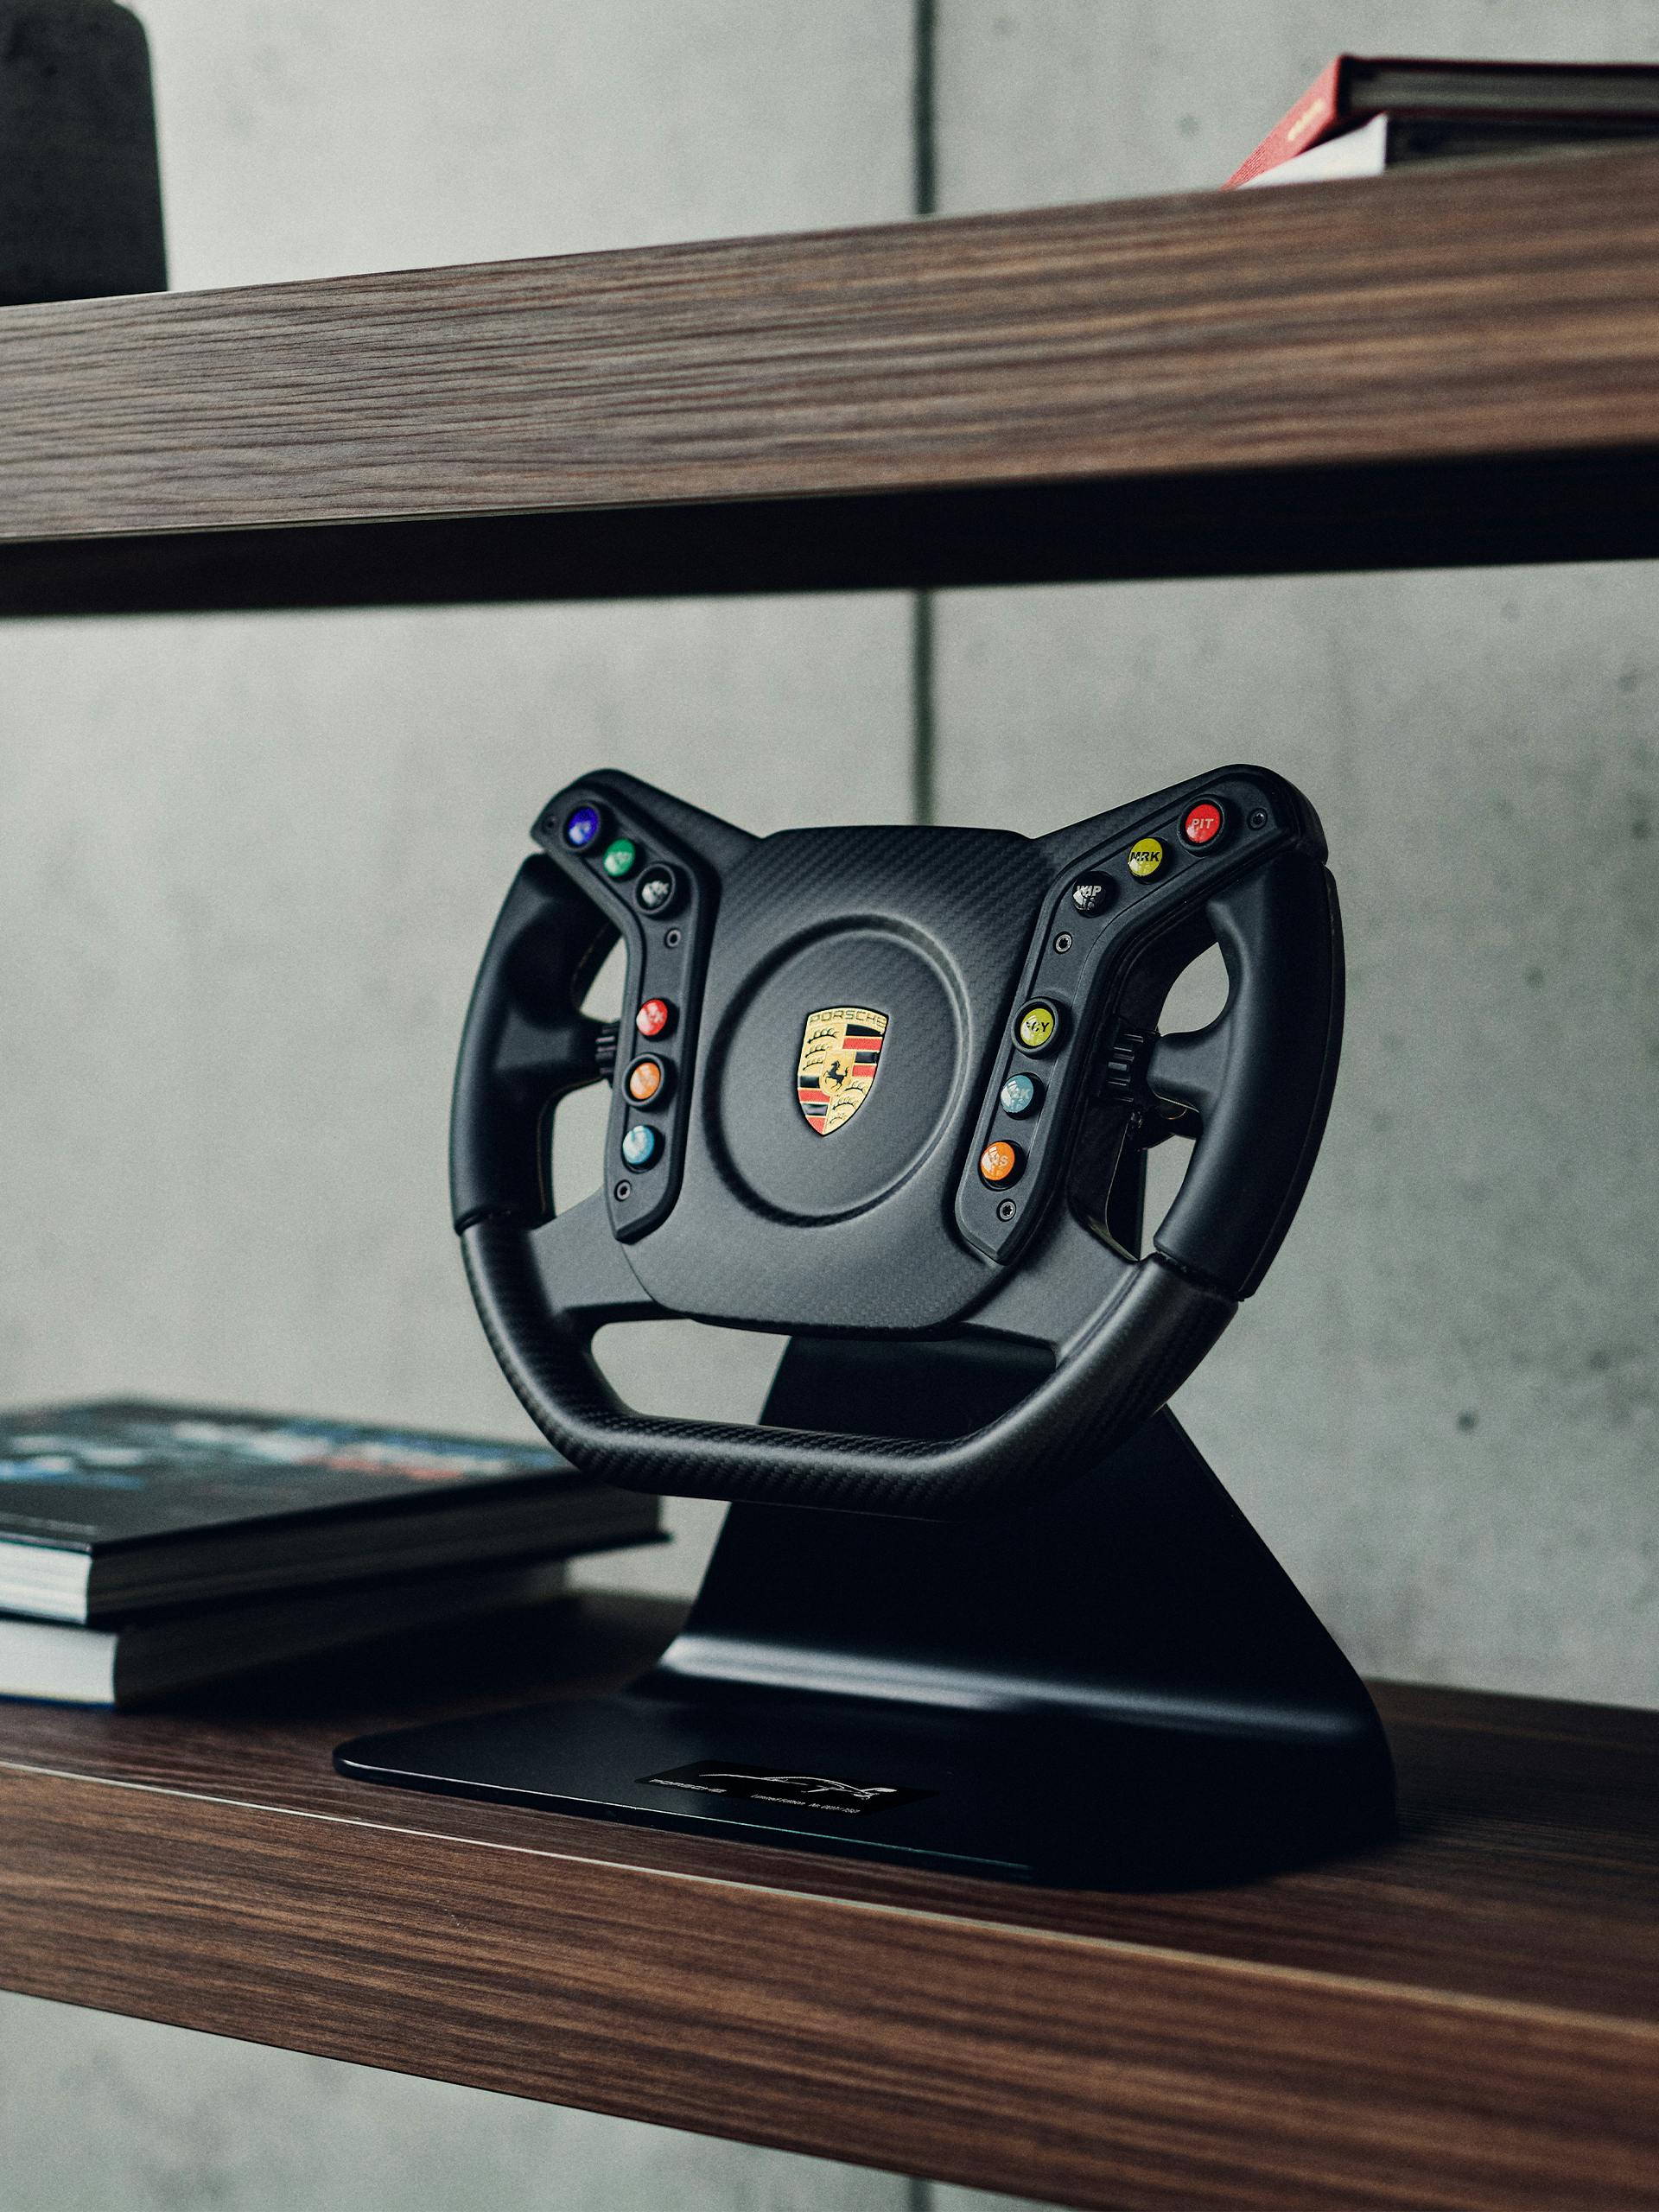 Pictured is the new Porsche Gaming steering wheel in black on a brown wooden shelf.